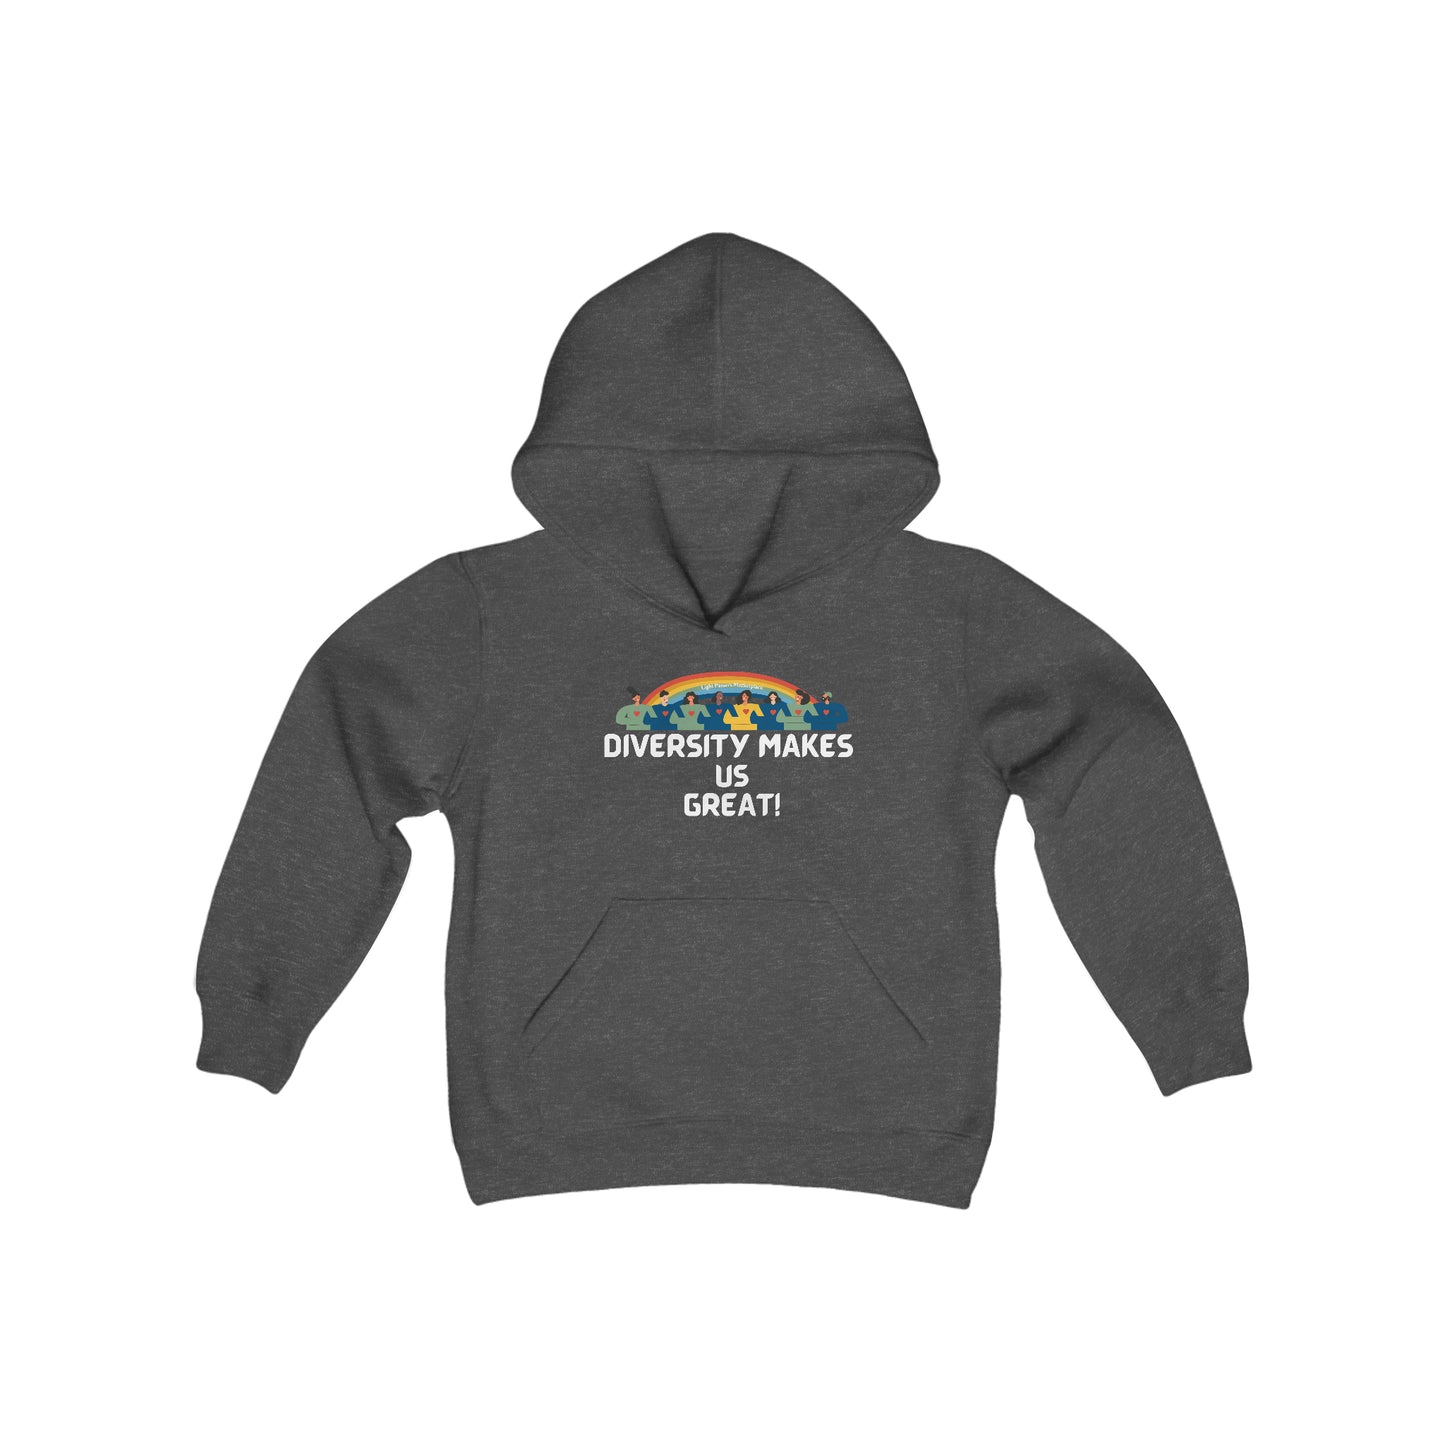 Light Passers Marketplace Diversity Great Youth Hooded Sweatshirt Diversity, Mental Health, Simple Messages